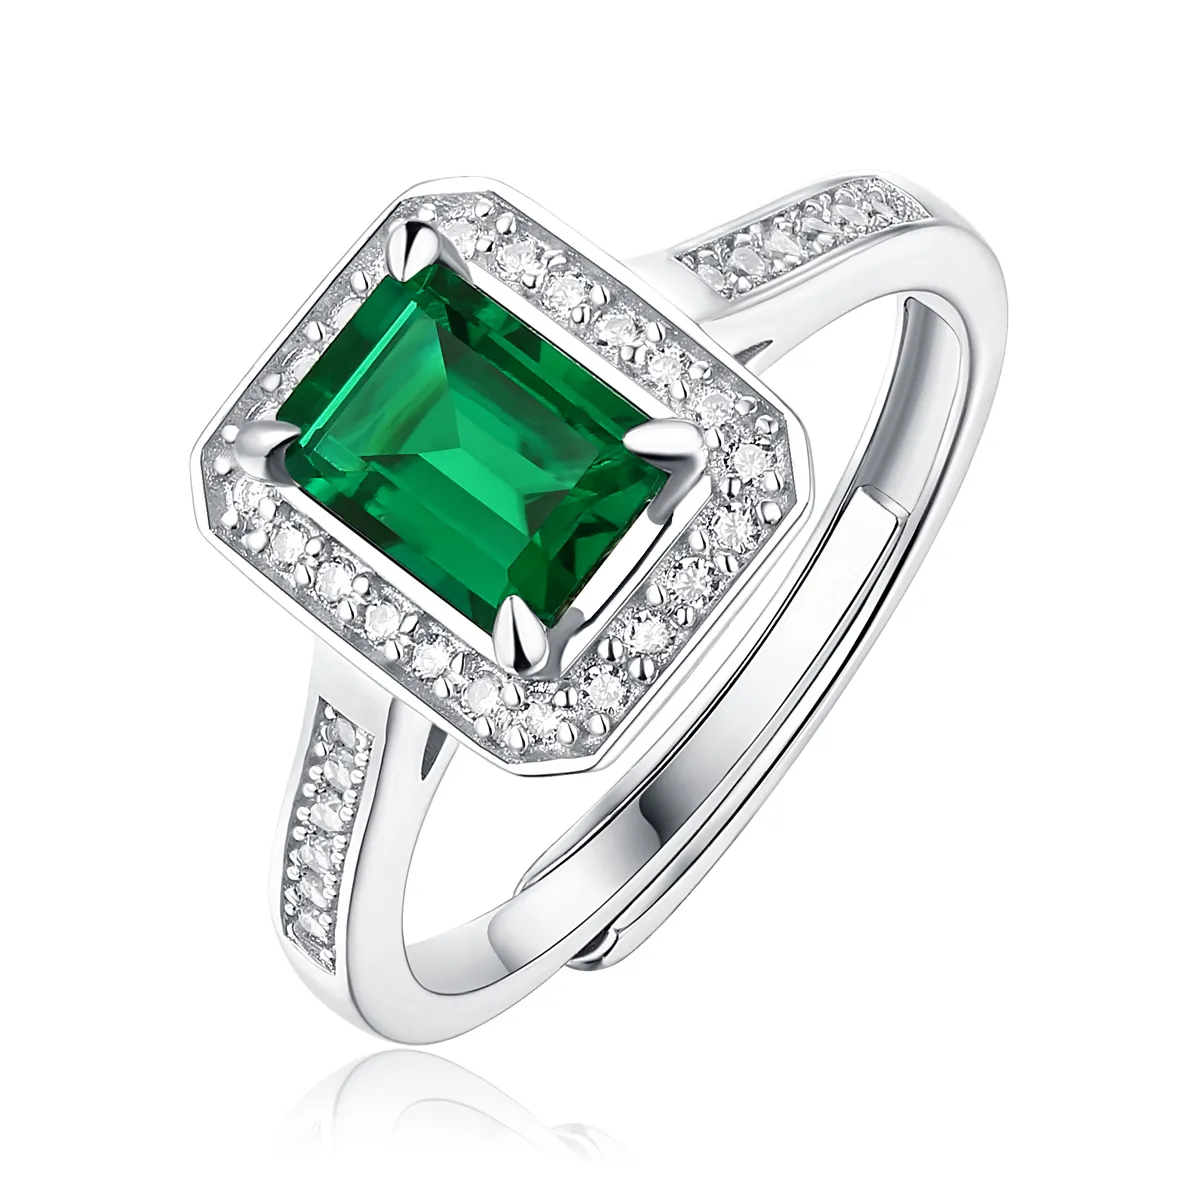 Yulaili New Popular 925 Sterling Silver Wedding Natural Square Diamond Green Emerald Ring Delicate Simple Work Occupation Ring